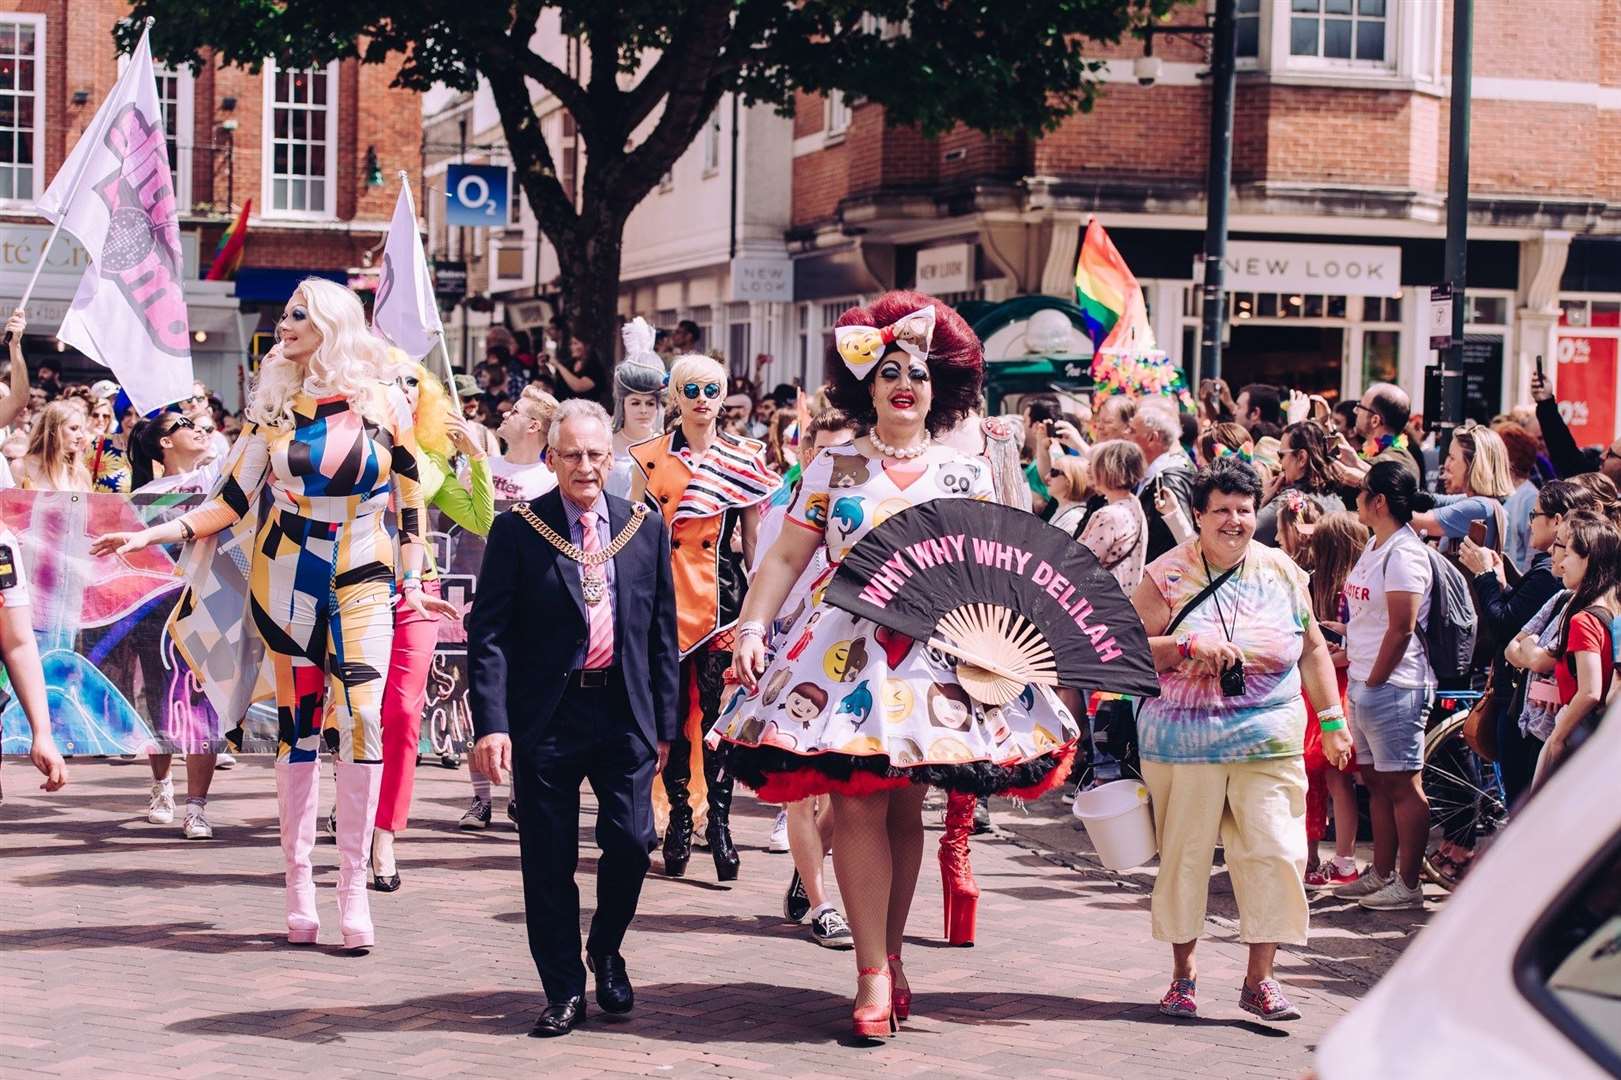 Canterbury Pride had to be cancelled this year